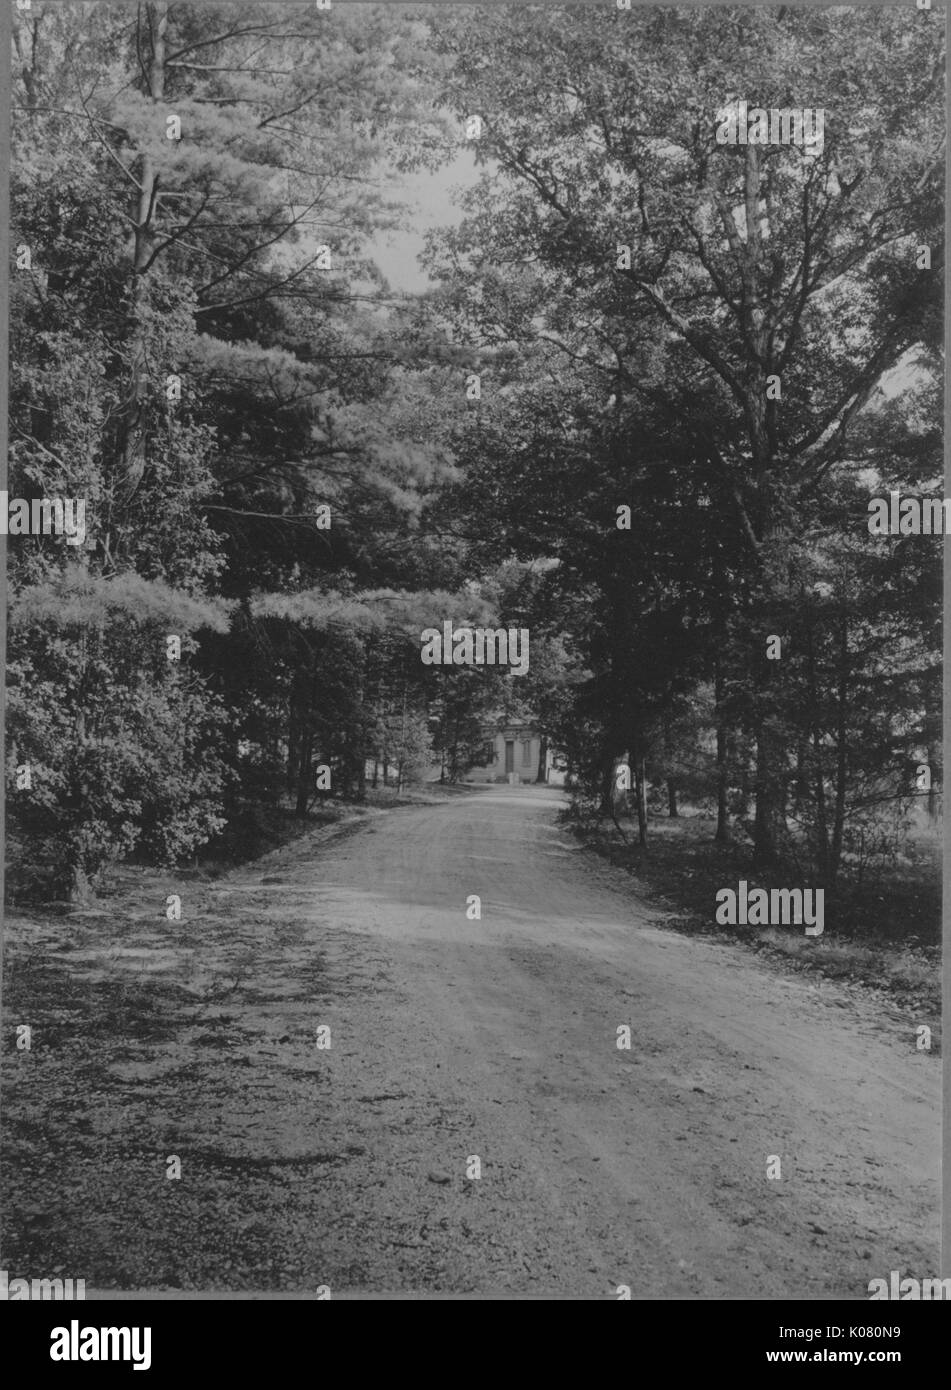 Portrait shot of a dirt road, lined by trees, Roland Park/Guilford, United States, 1910. This image is from a series documenting the construction and sale of homes in the Roland Park/Guilford neighborhood of Baltimore, a streetcar suburb and one of the first planned communities in the United States. Stock Photo